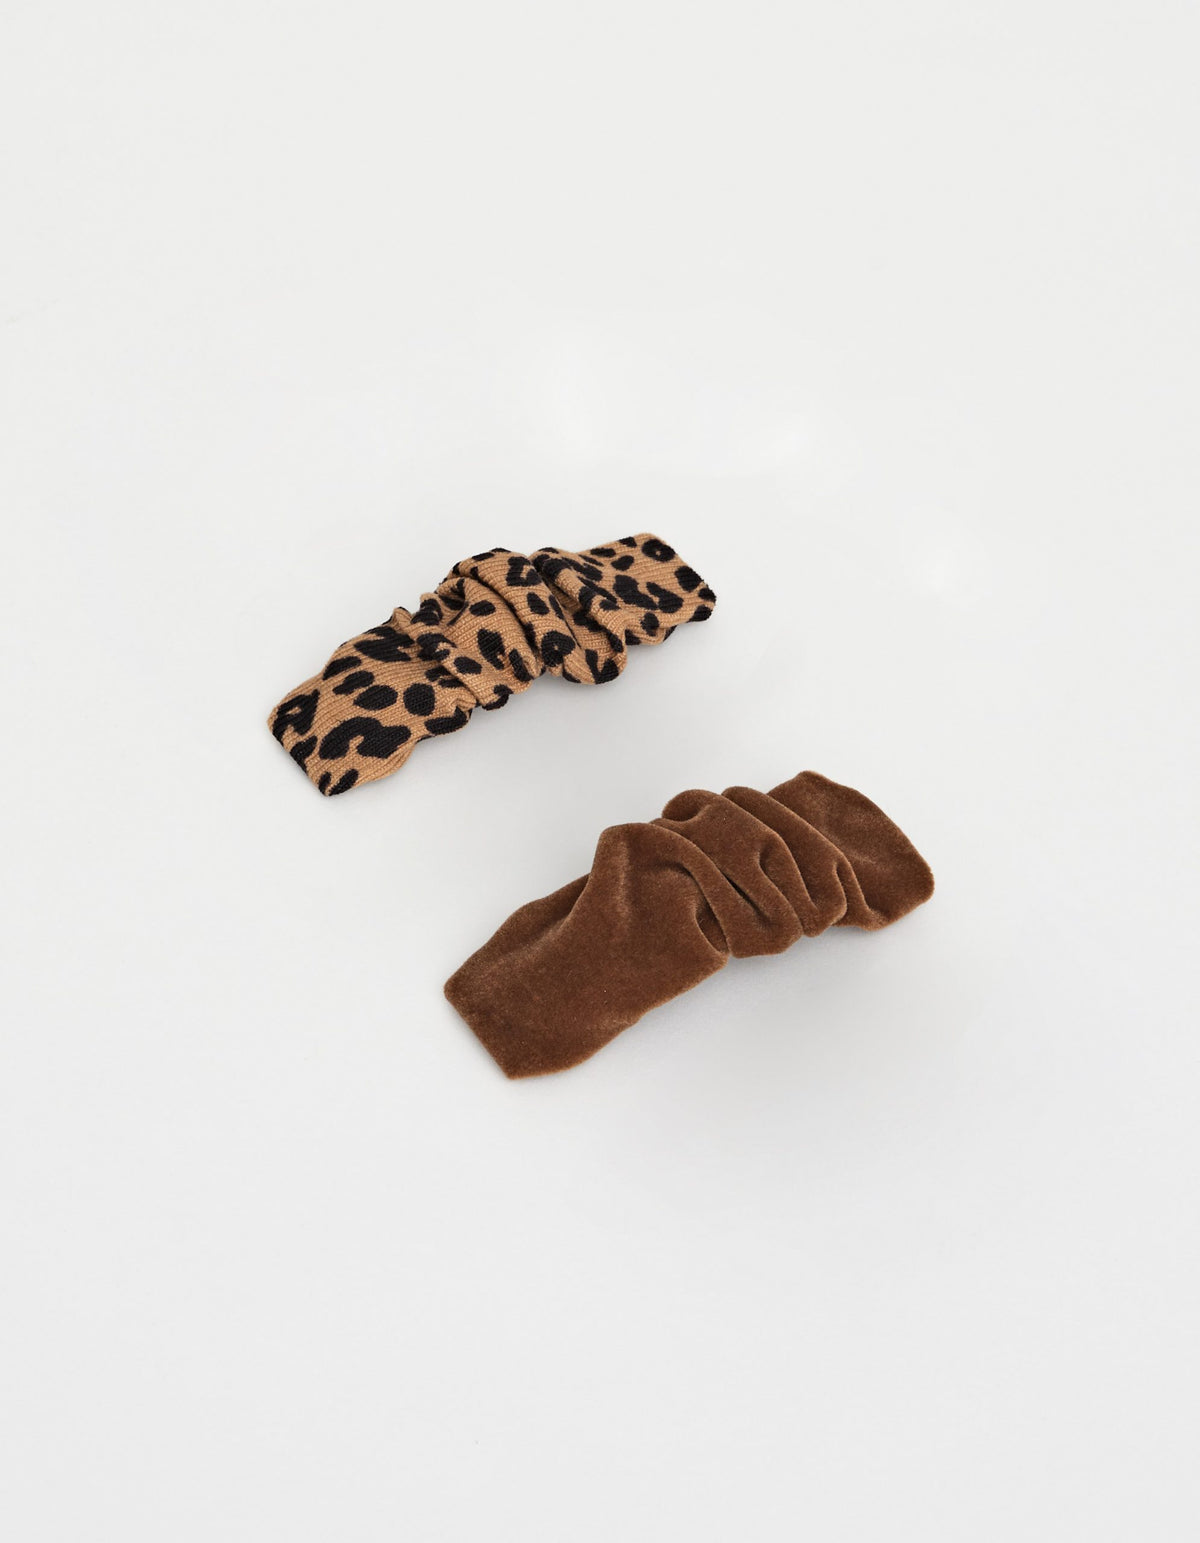 Chocolate/Leopard Hair Clips- Set of 2